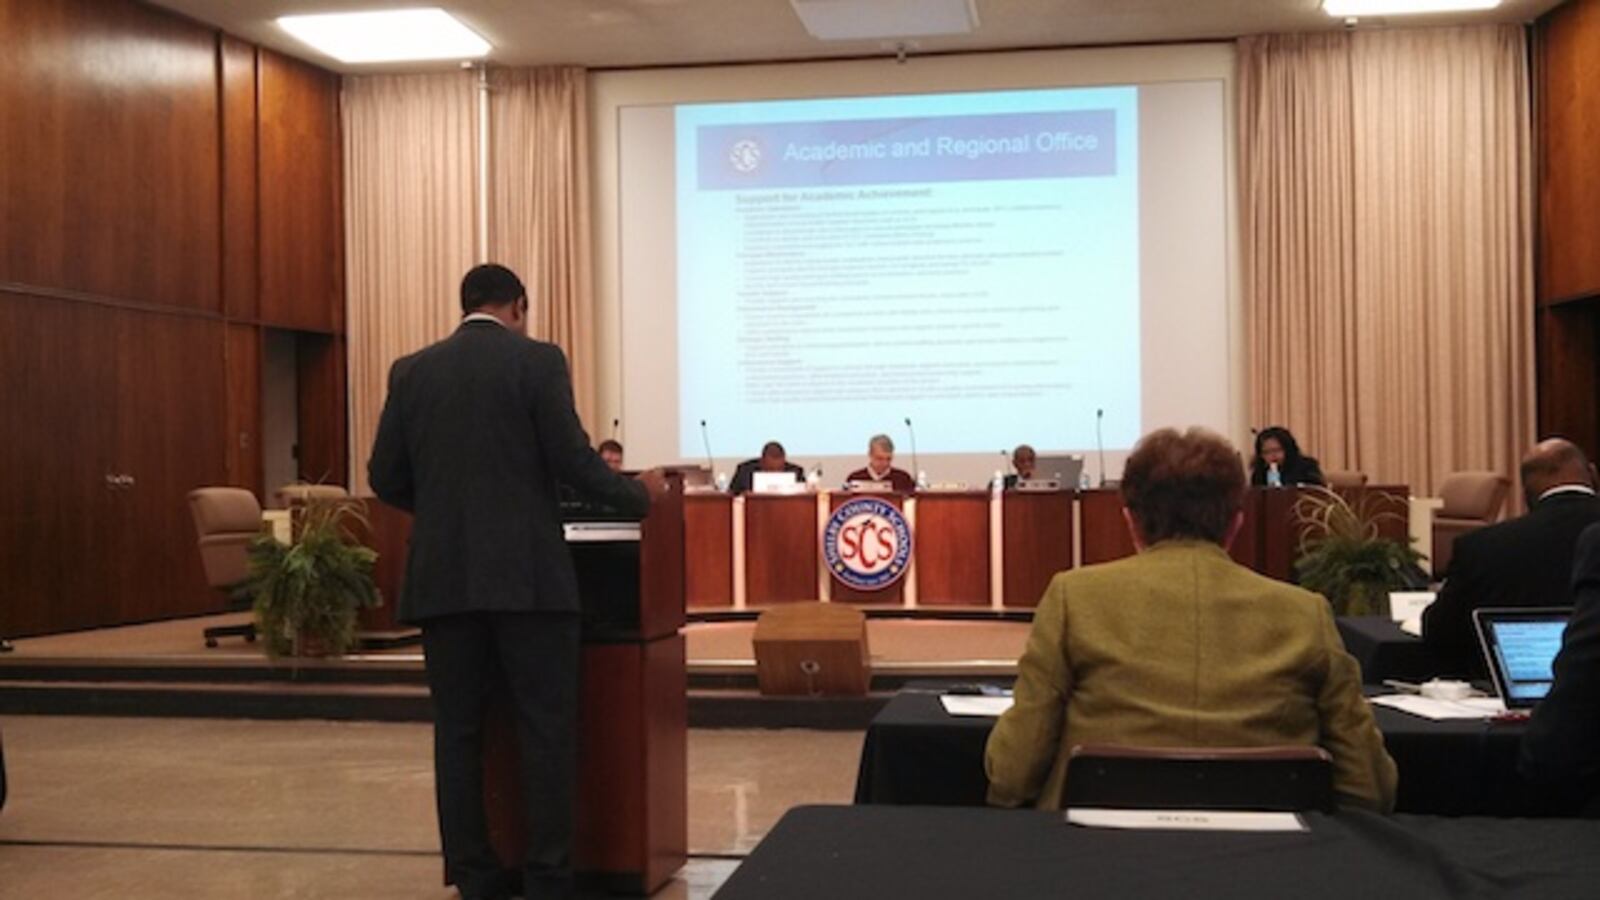 SCS Chief Academic Officer Roderick Richmond presents his department's plans for budget cuts and spending.